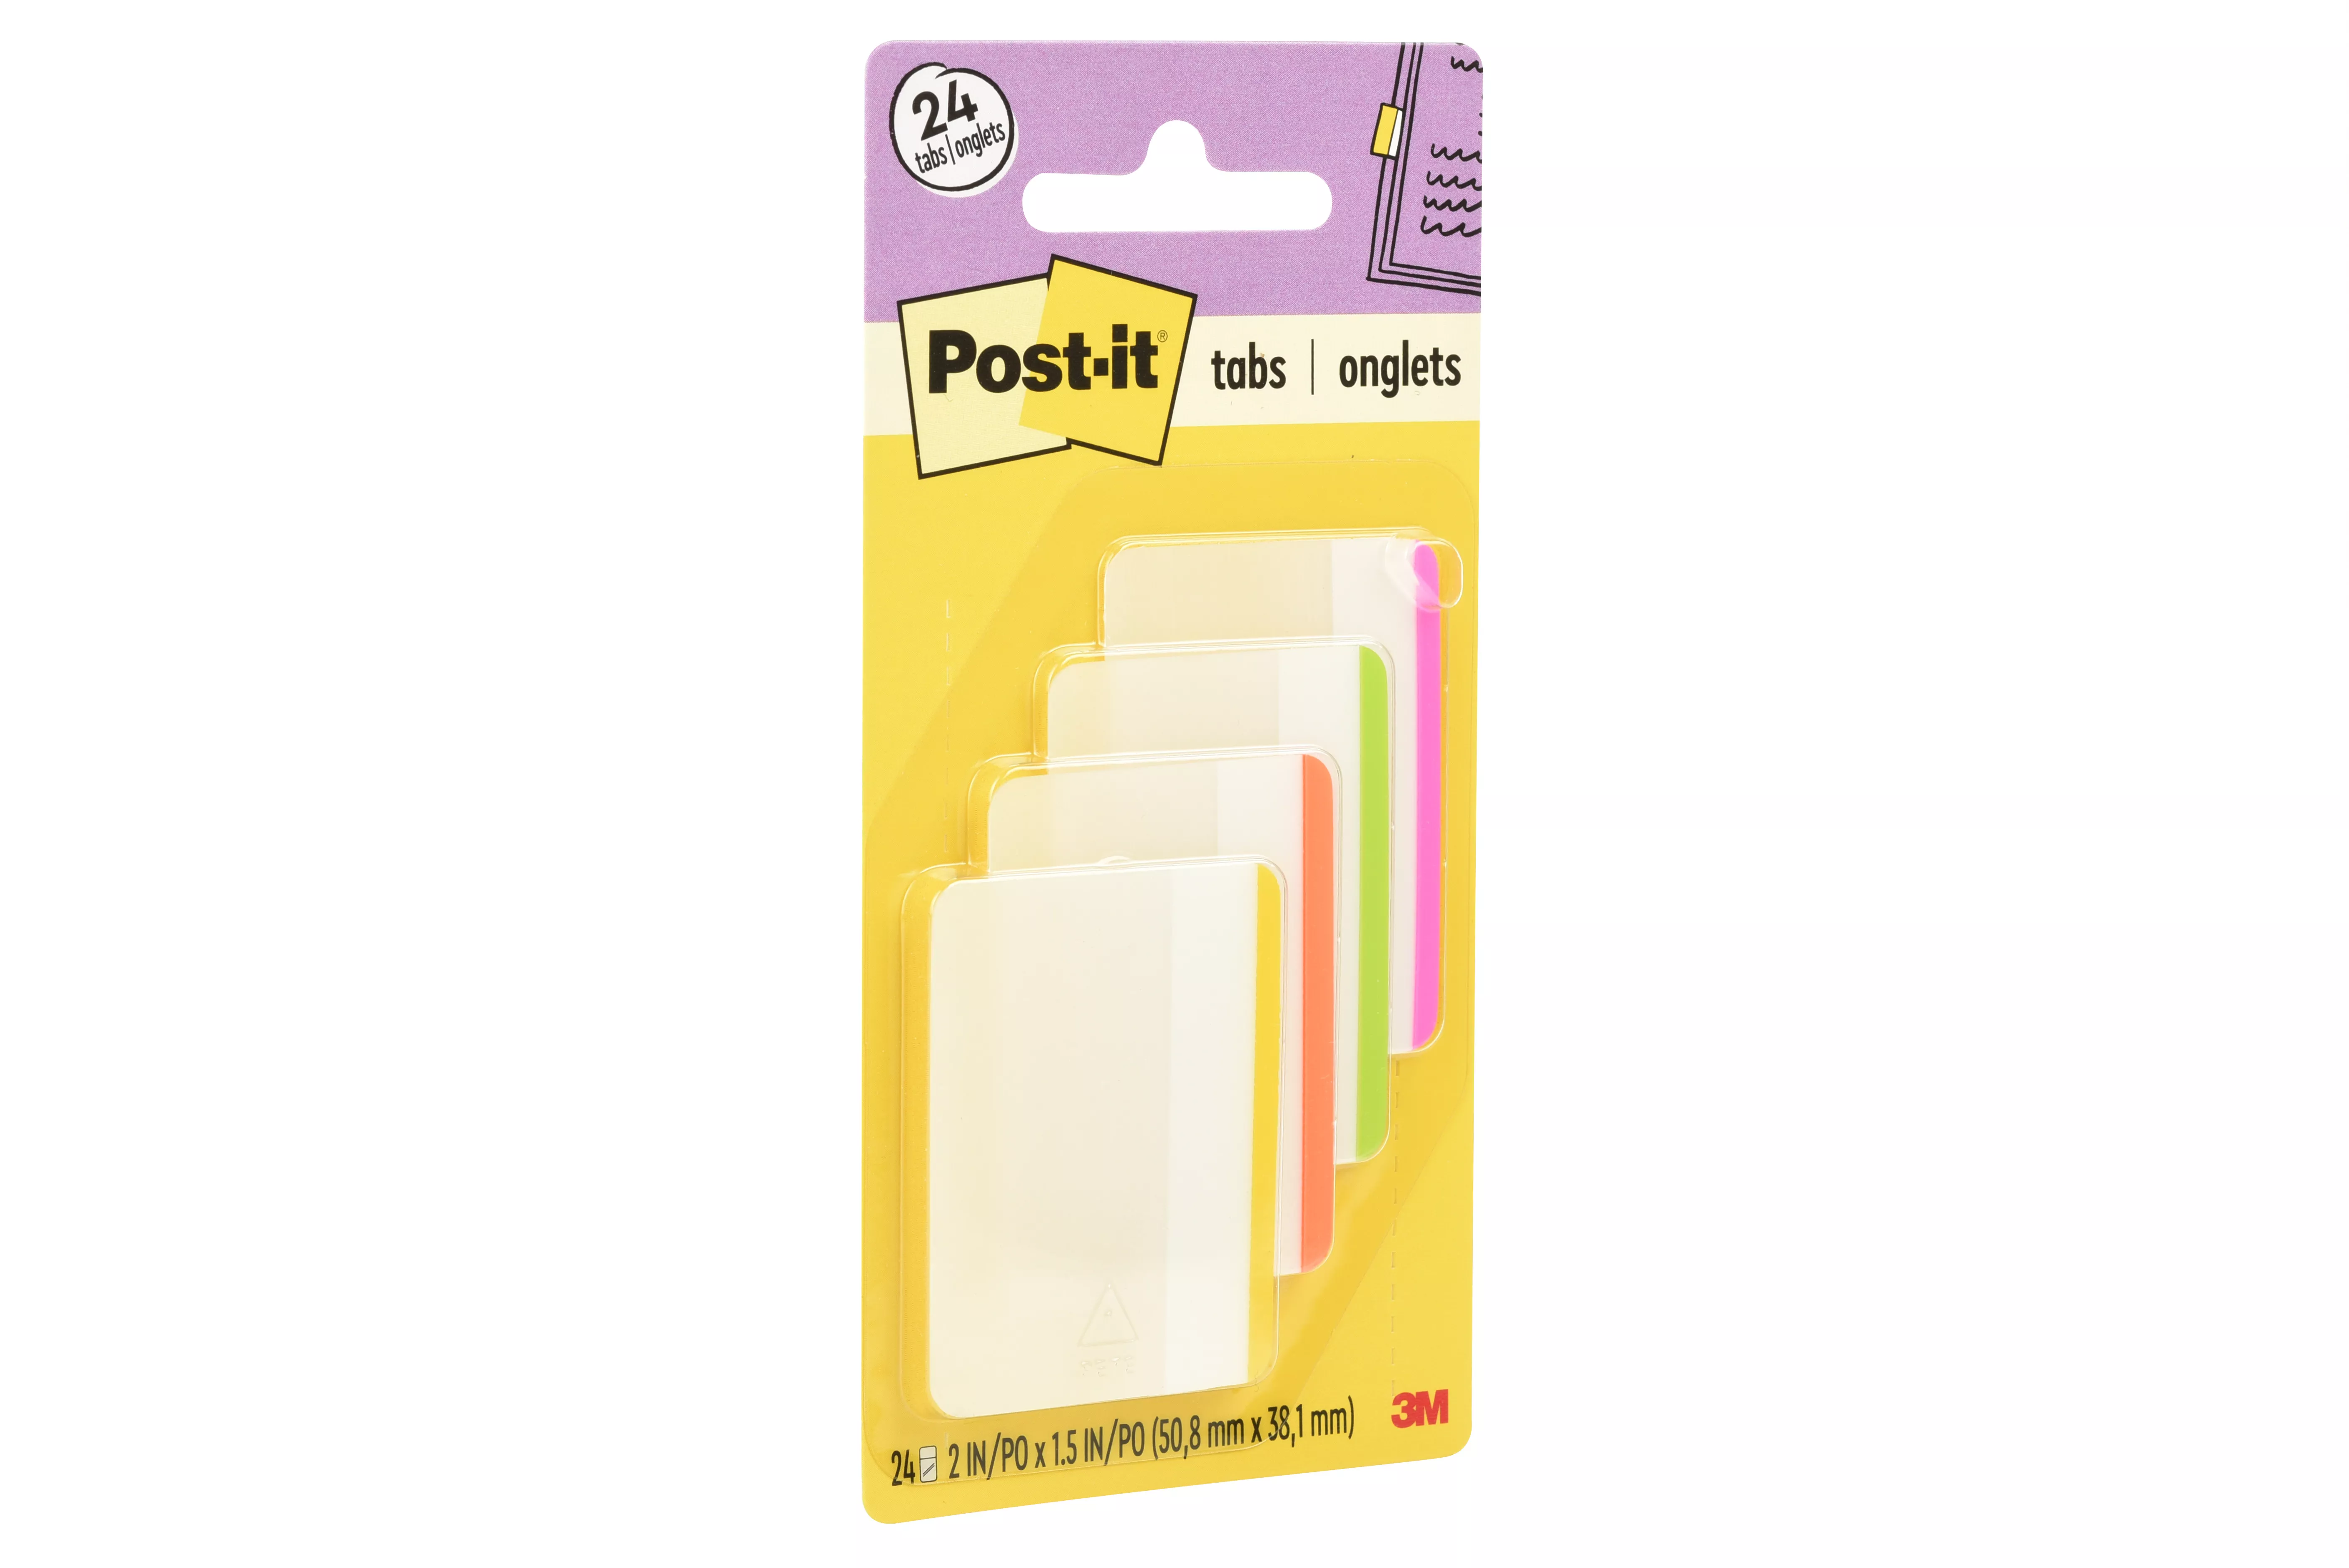 Post-it® Durable Tabs 686F-1BB, 2 in. x 1.5 in. (50.8 mm x 38 mm) Beige,
Green, Red, Canary Yellow 24 pk/cs